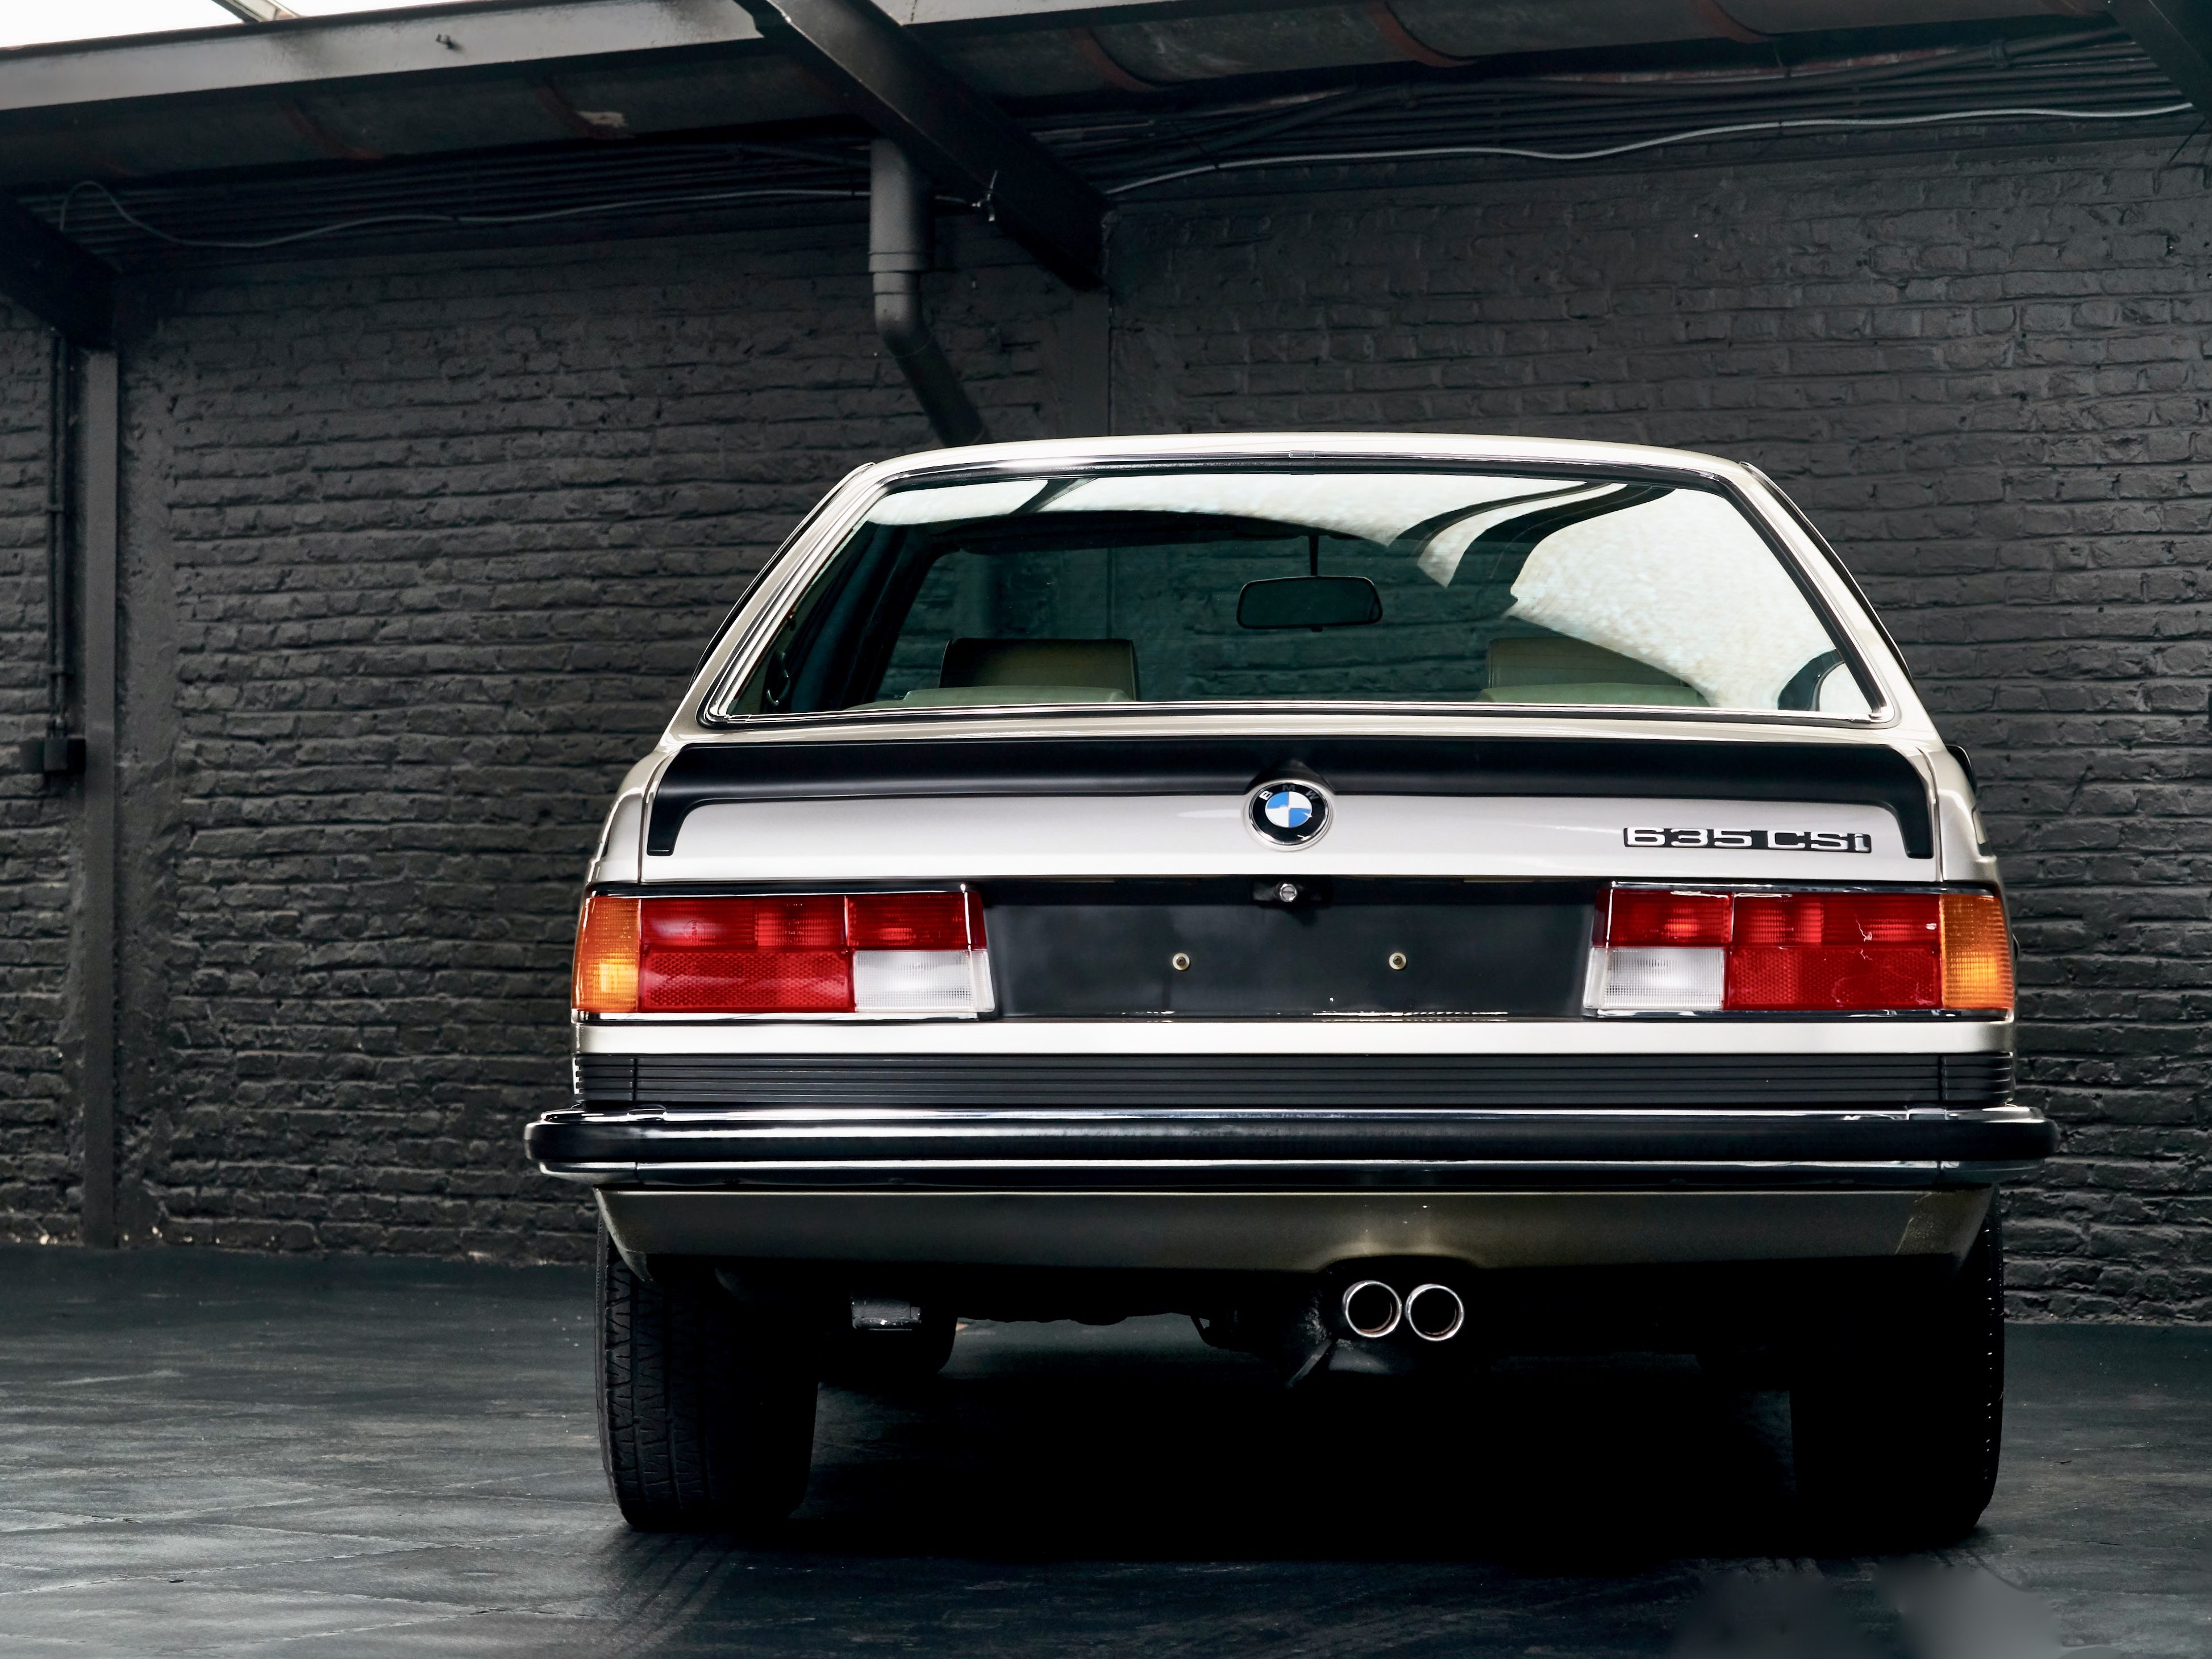 photo of a 1983 BMW 635 CSI for sale by Classic 42 Classic German Car Dealer www.classic42.be